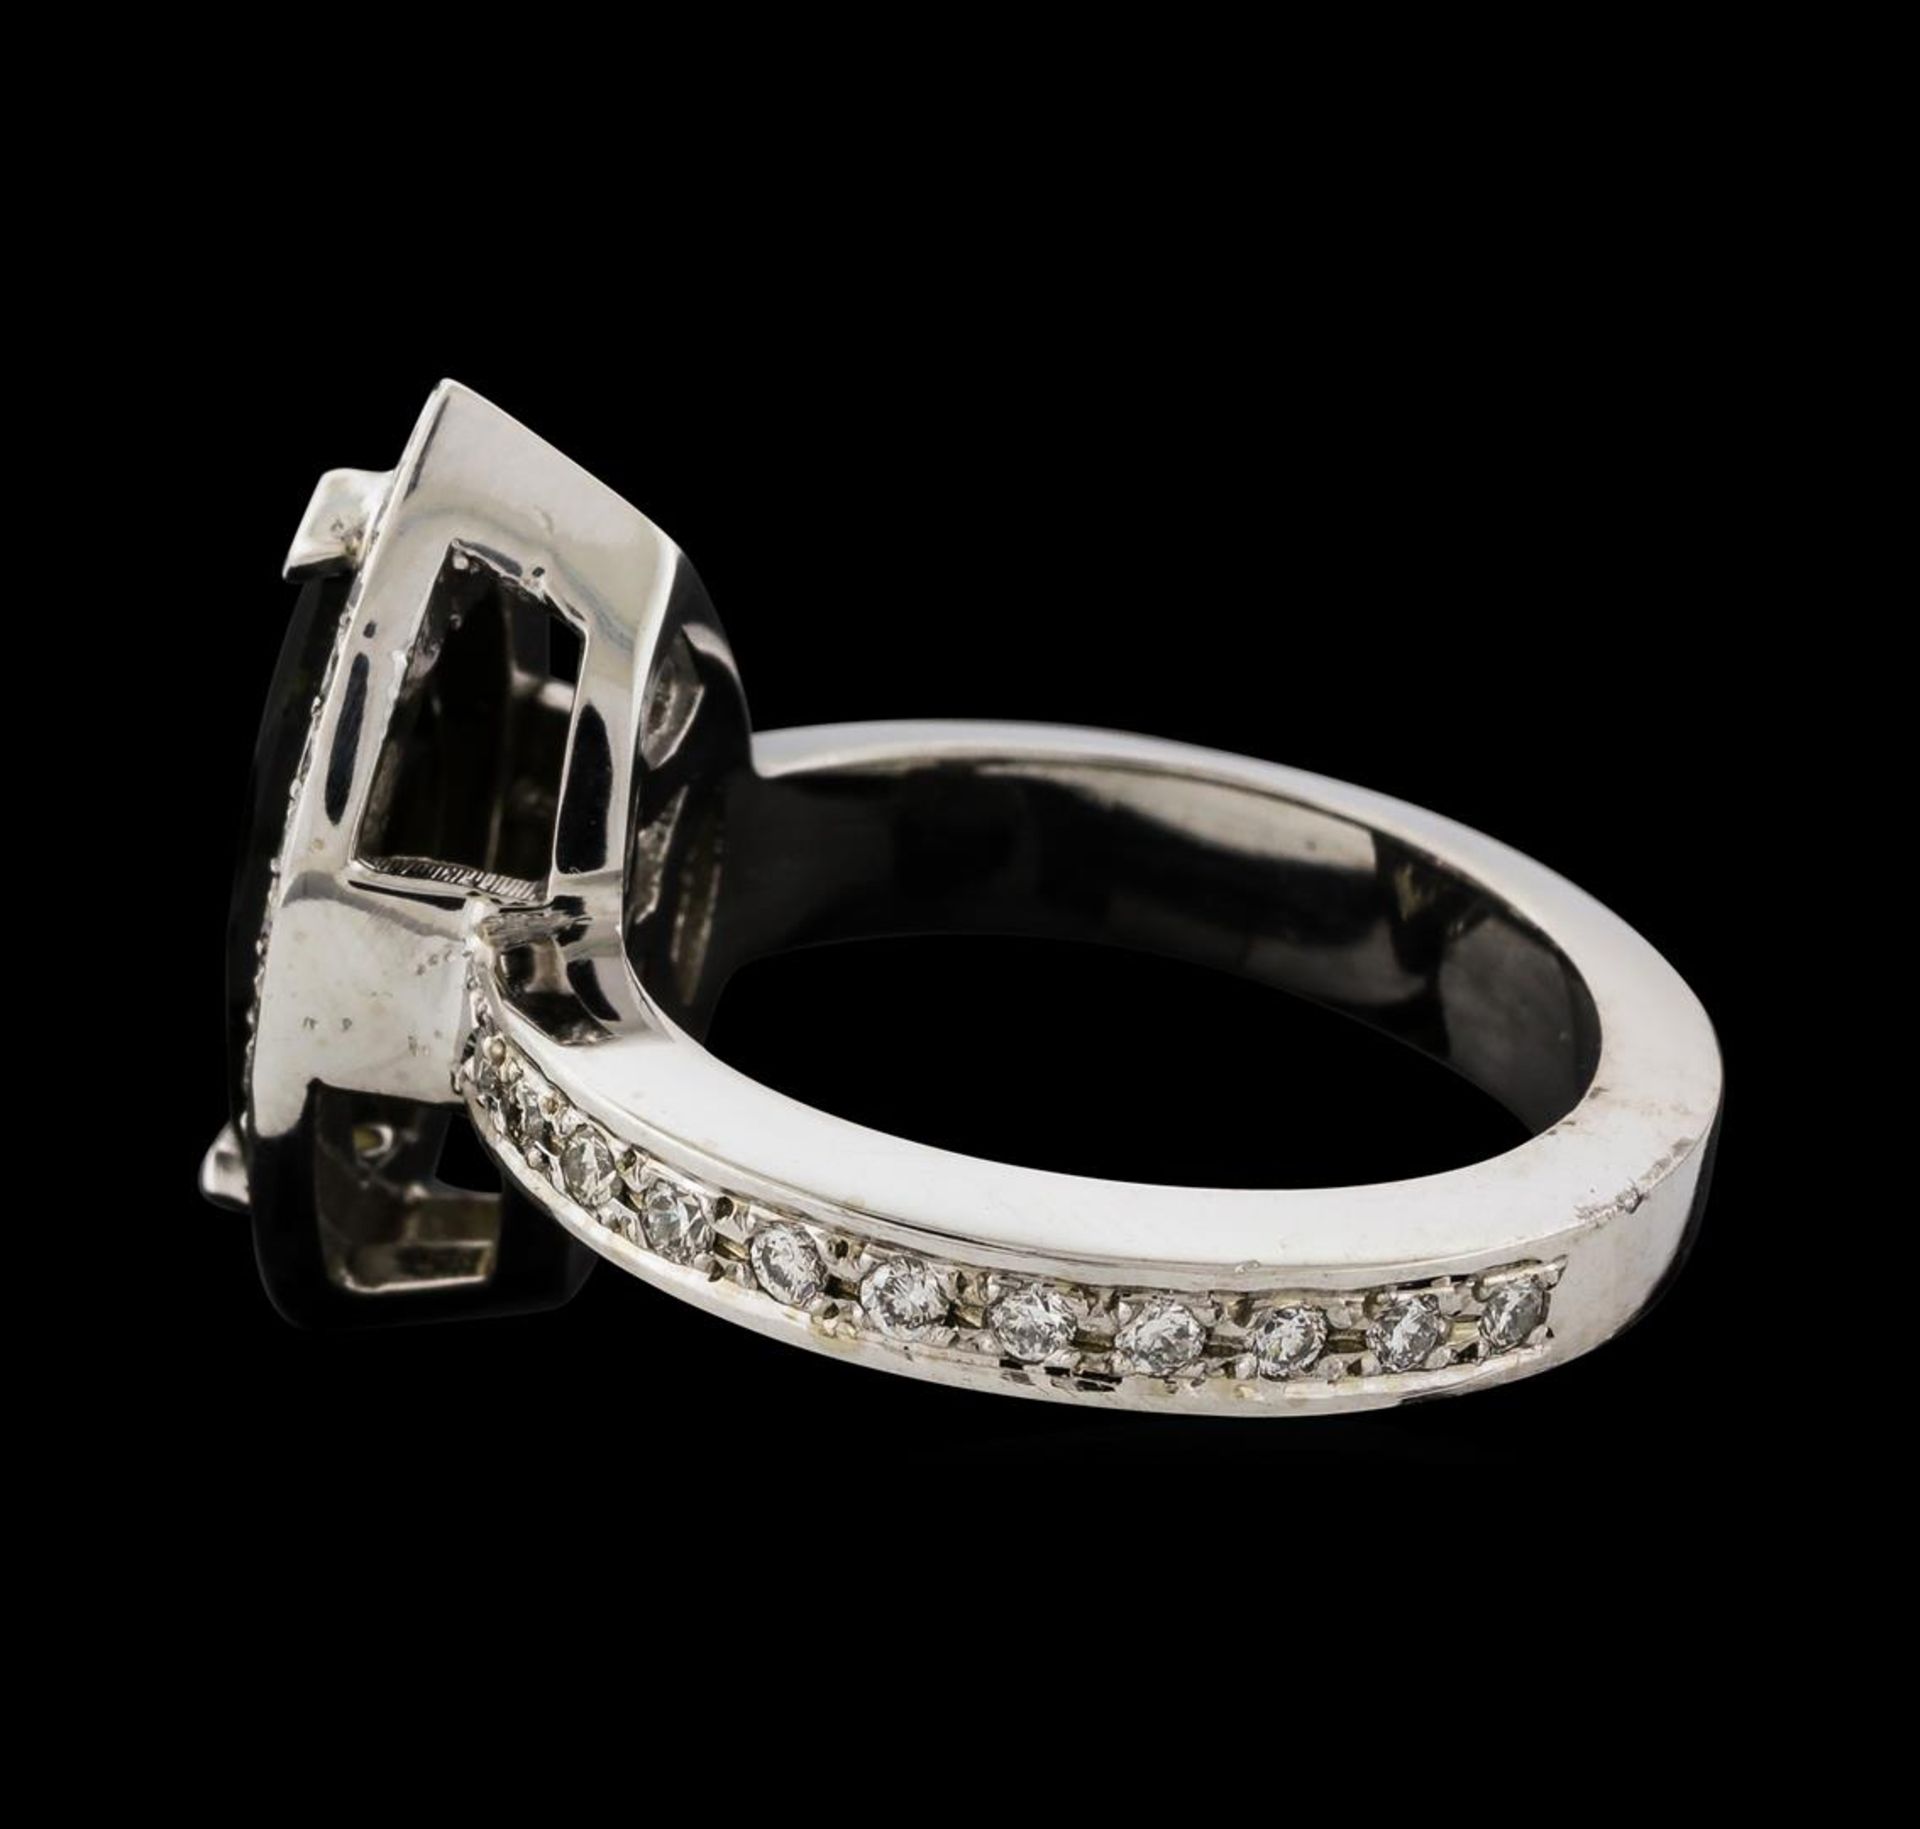 1.61 ctw Tourmaline and Diamond Ring - 14KT White Gold - Image 3 of 4